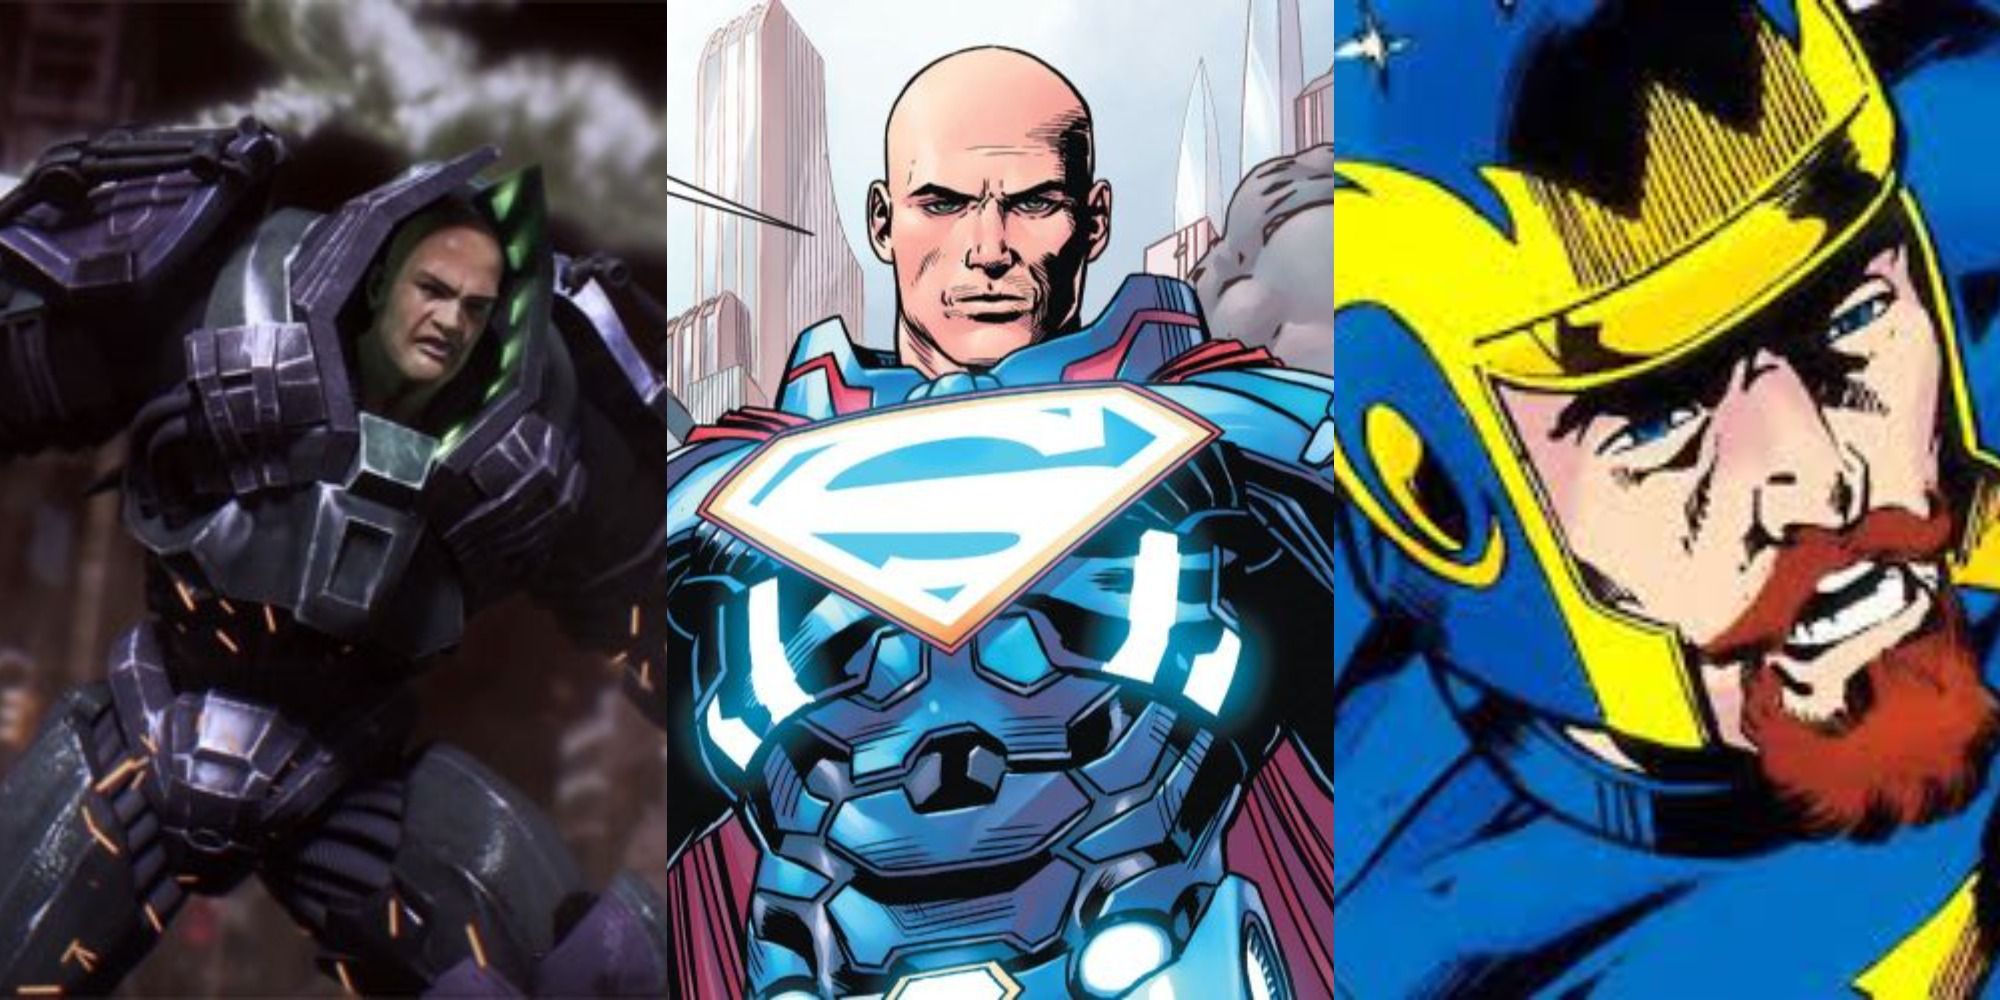 Heroic Versions of Lex Luthor Split Featured Injustice Lex Luthor Superman Lex Luthor and Alexander Luthor of Earth-3